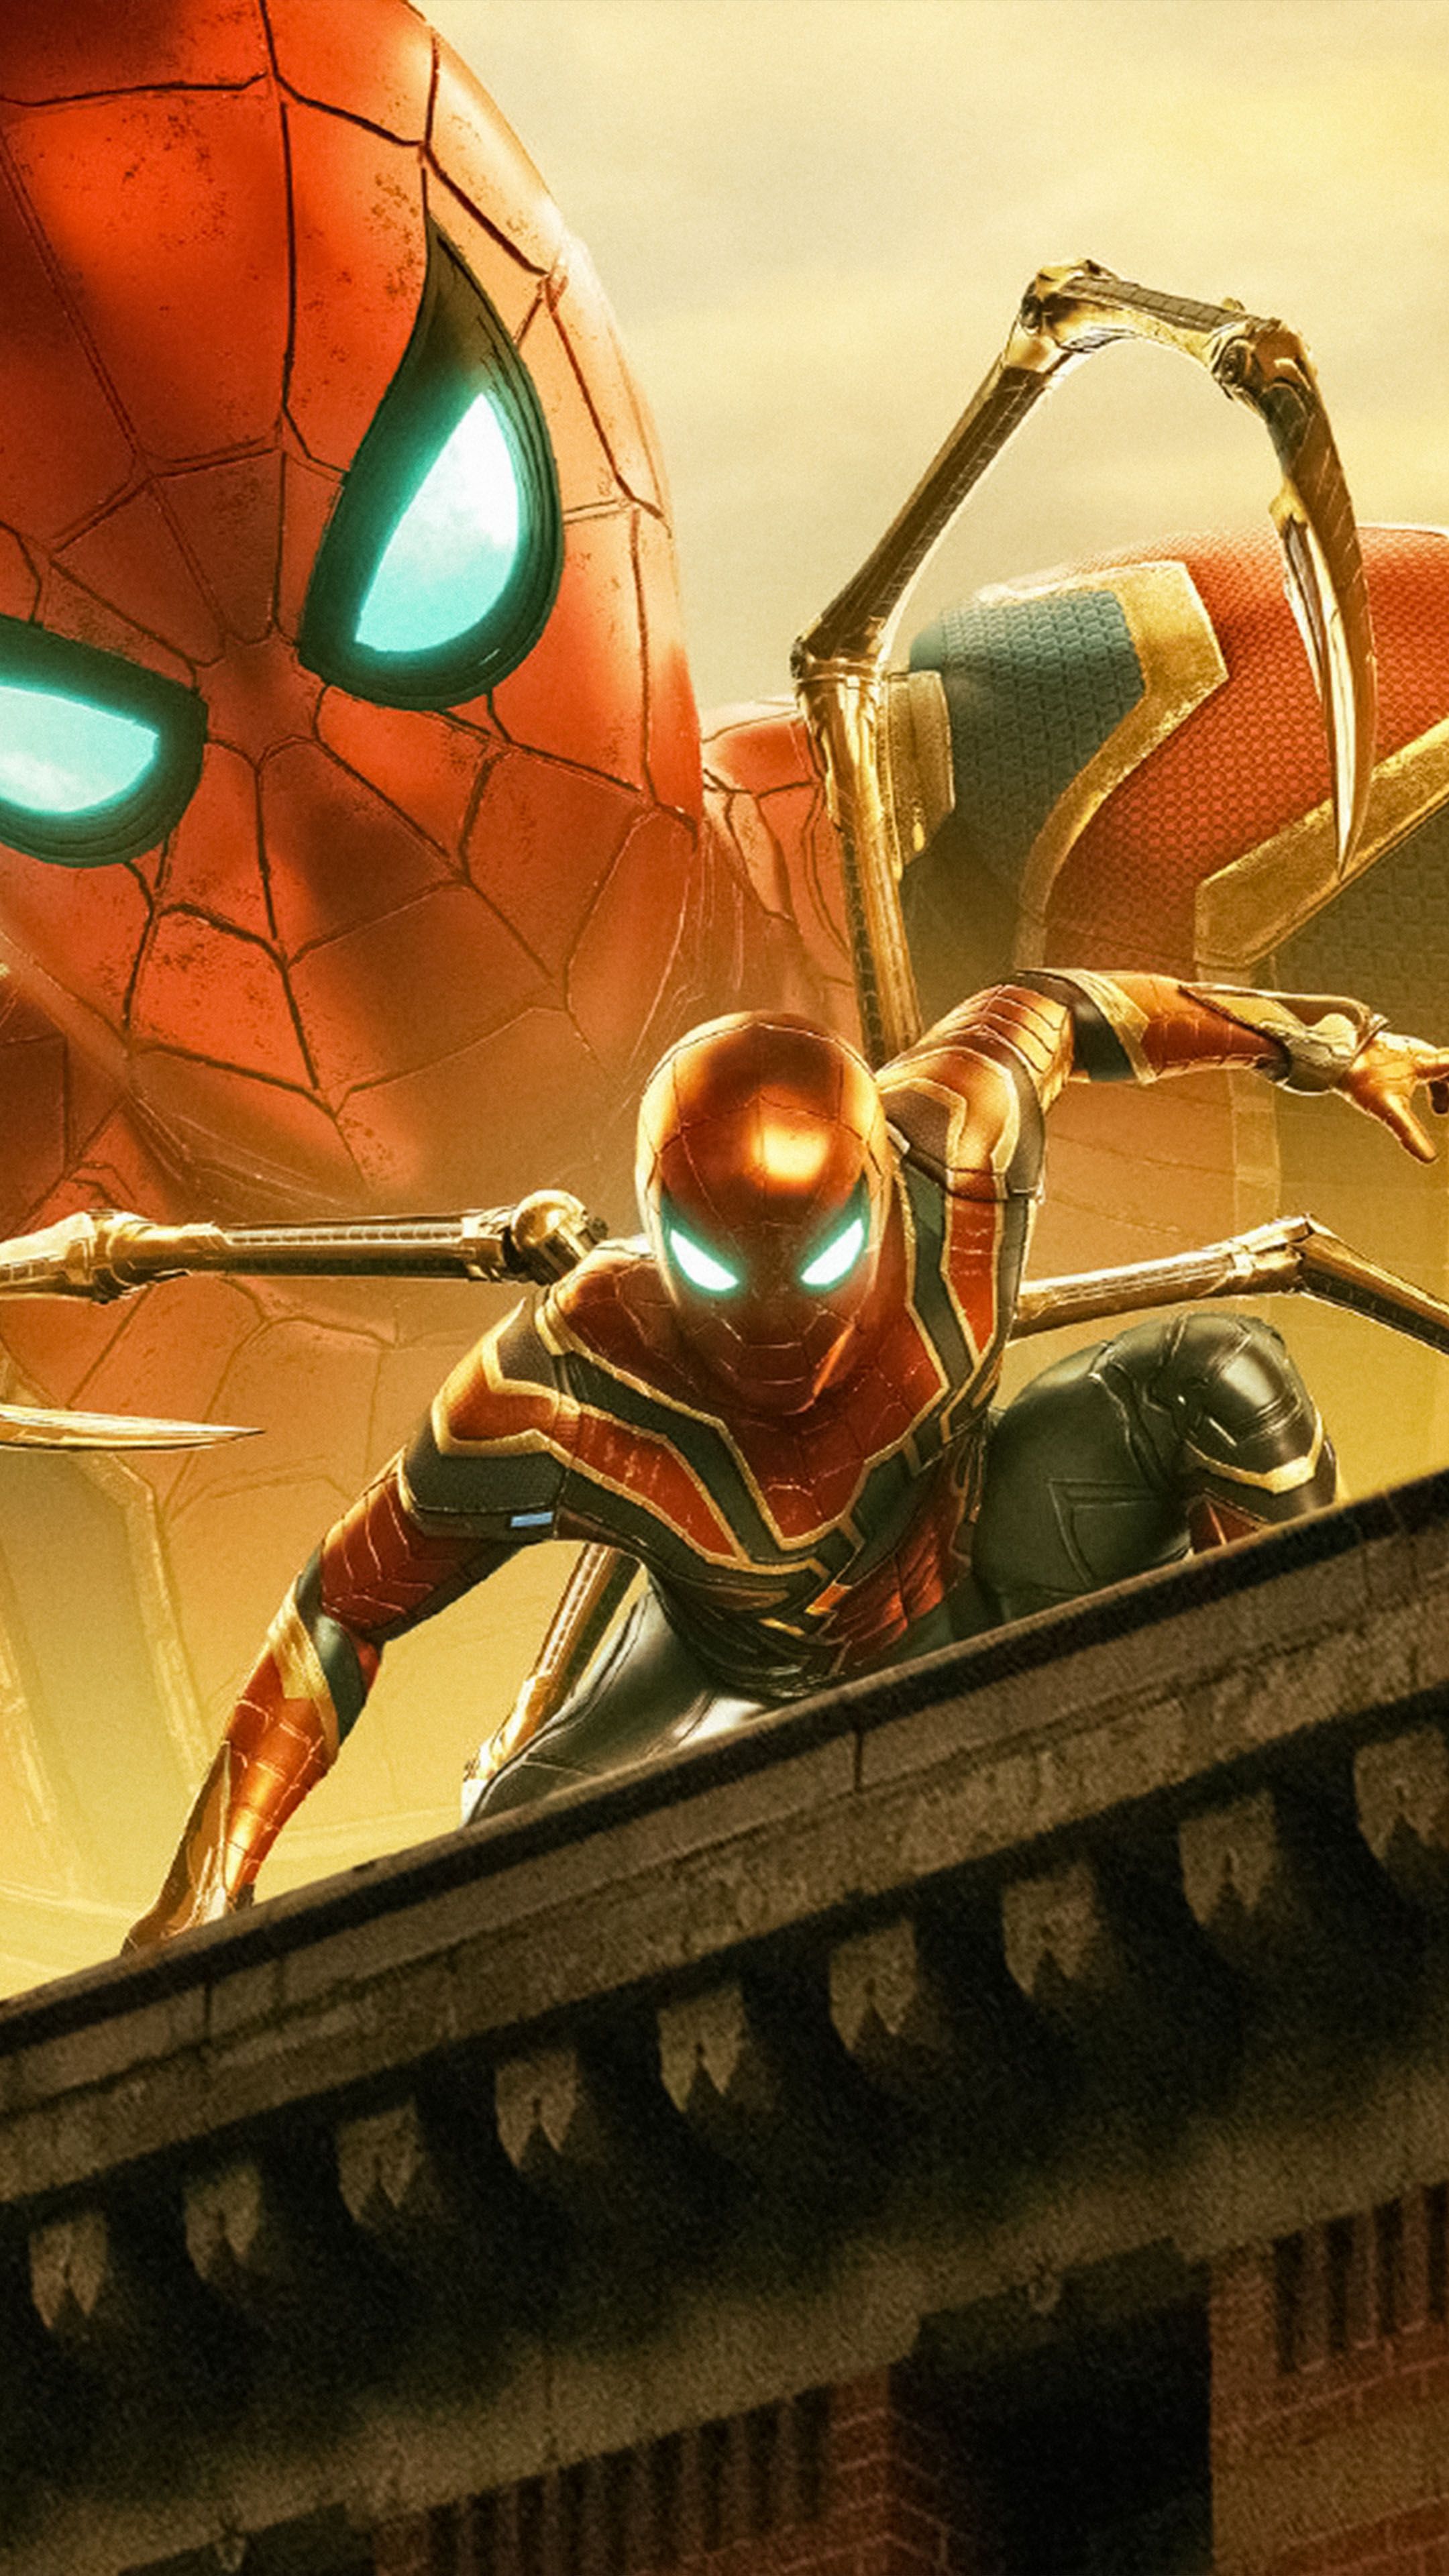 Iron Spider Spider Man Far From Home 2019 4K Ultra HD Mobile Wallpaper